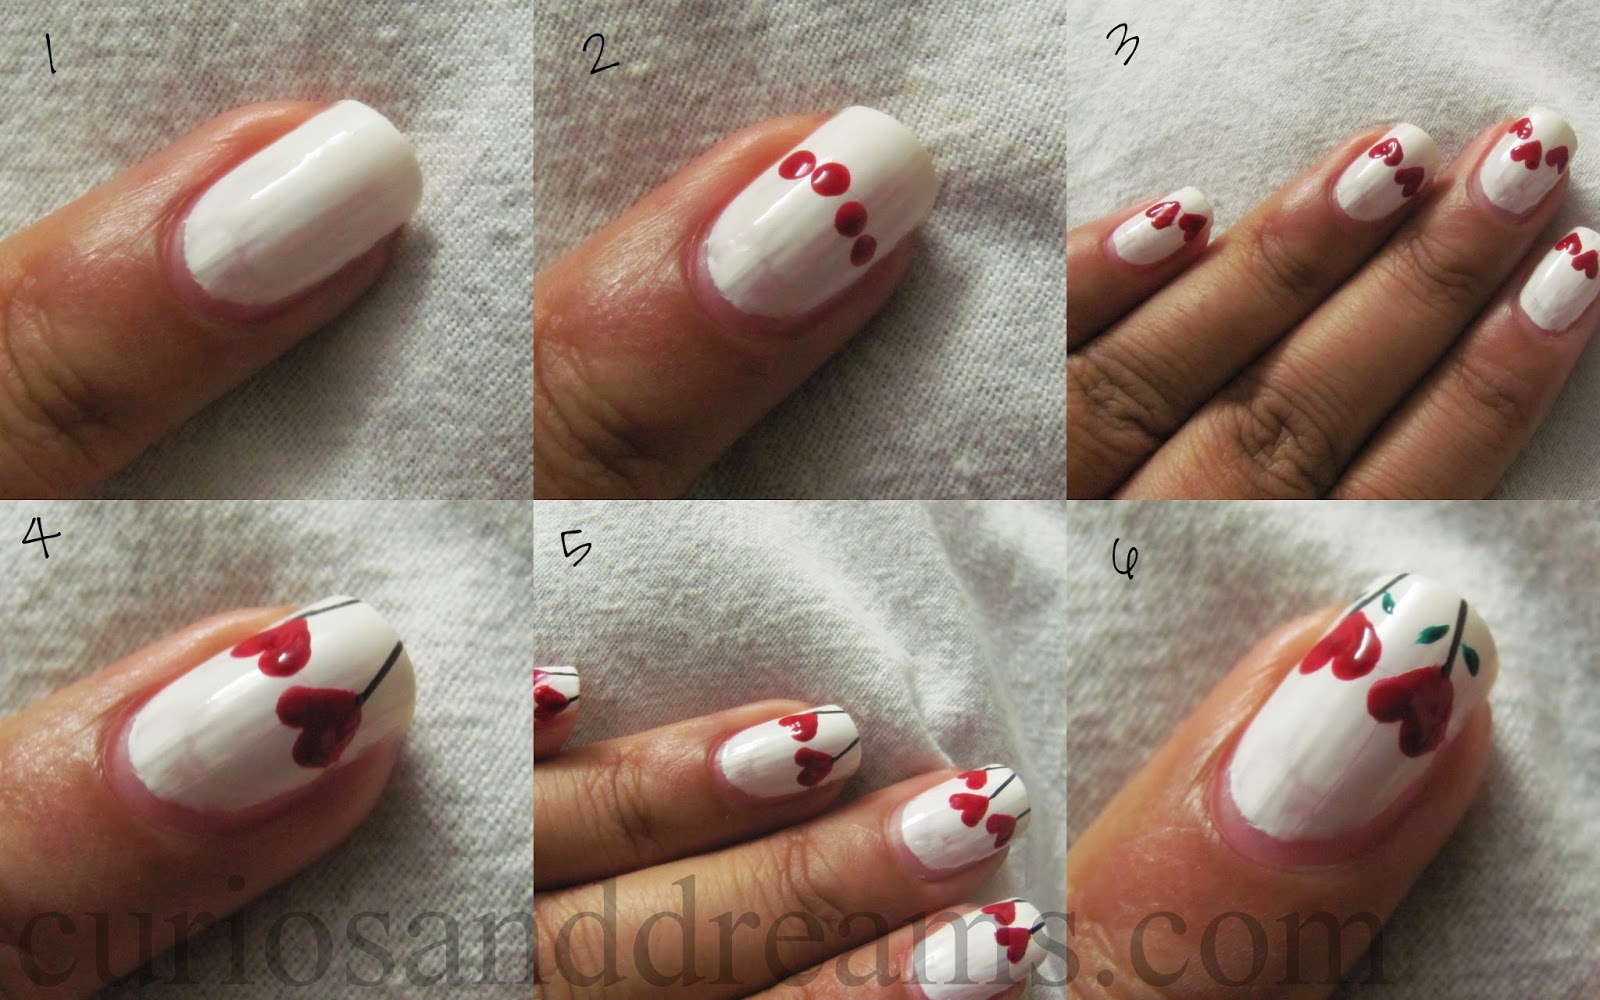 2. Cute and Easy Valentine's Day Nail Designs - wide 9